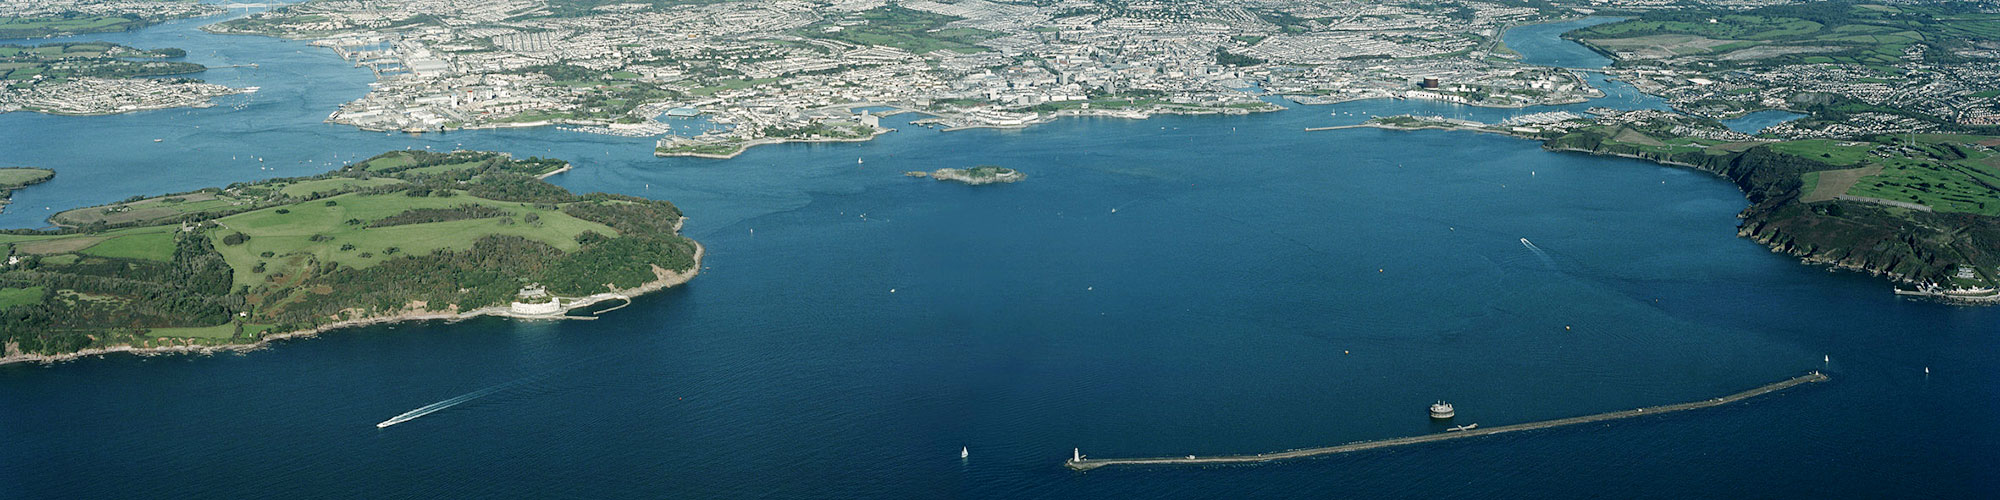 Aerial view of Plymouth Sound looking towards the city